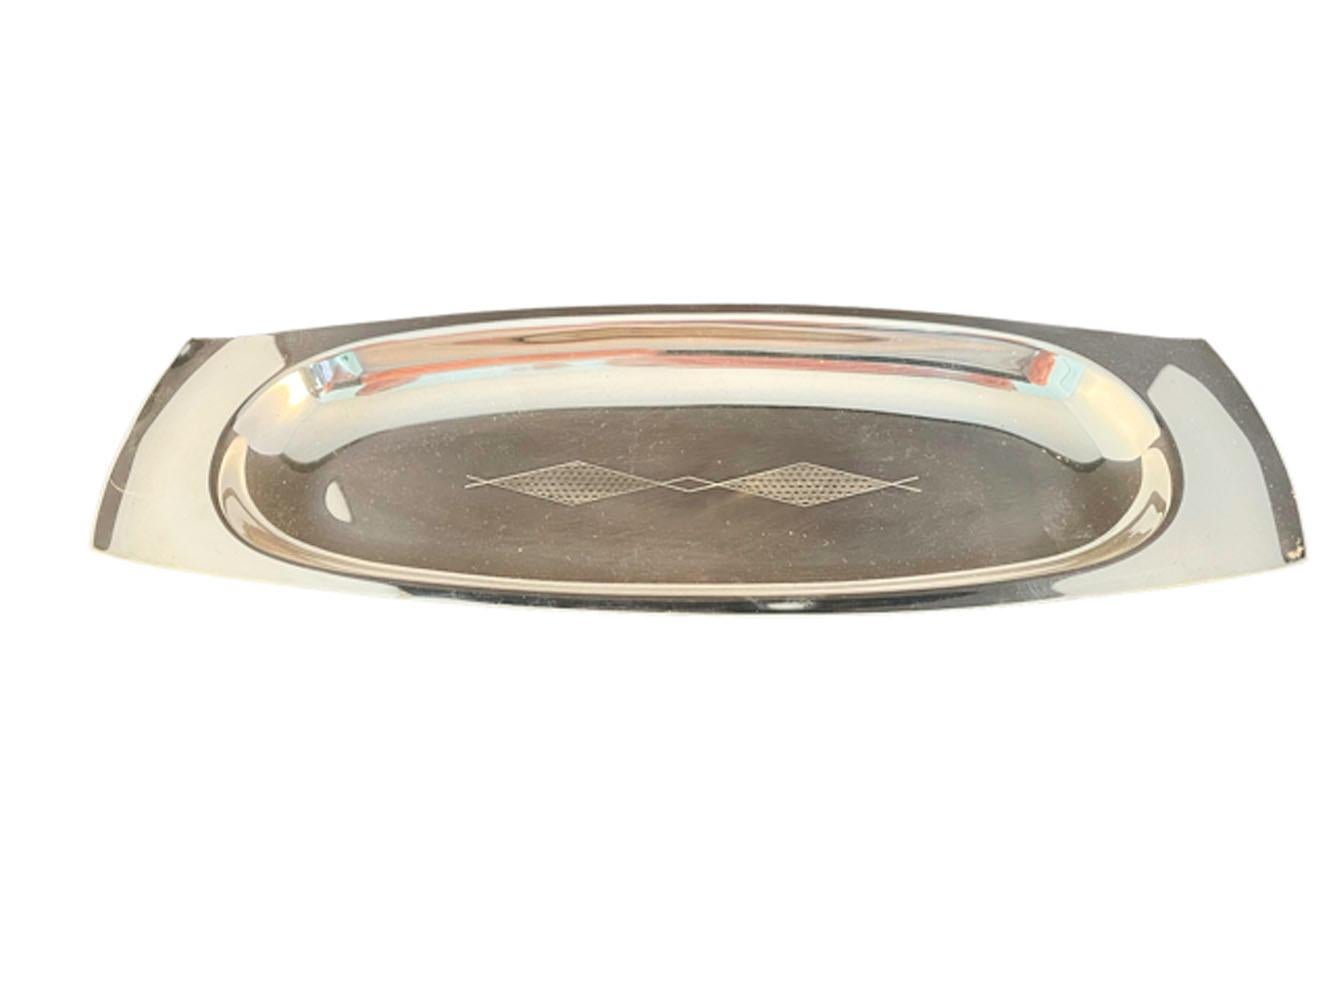 Art Deco Silver Plate Hors D' Oeuvres Tray For Sale 4